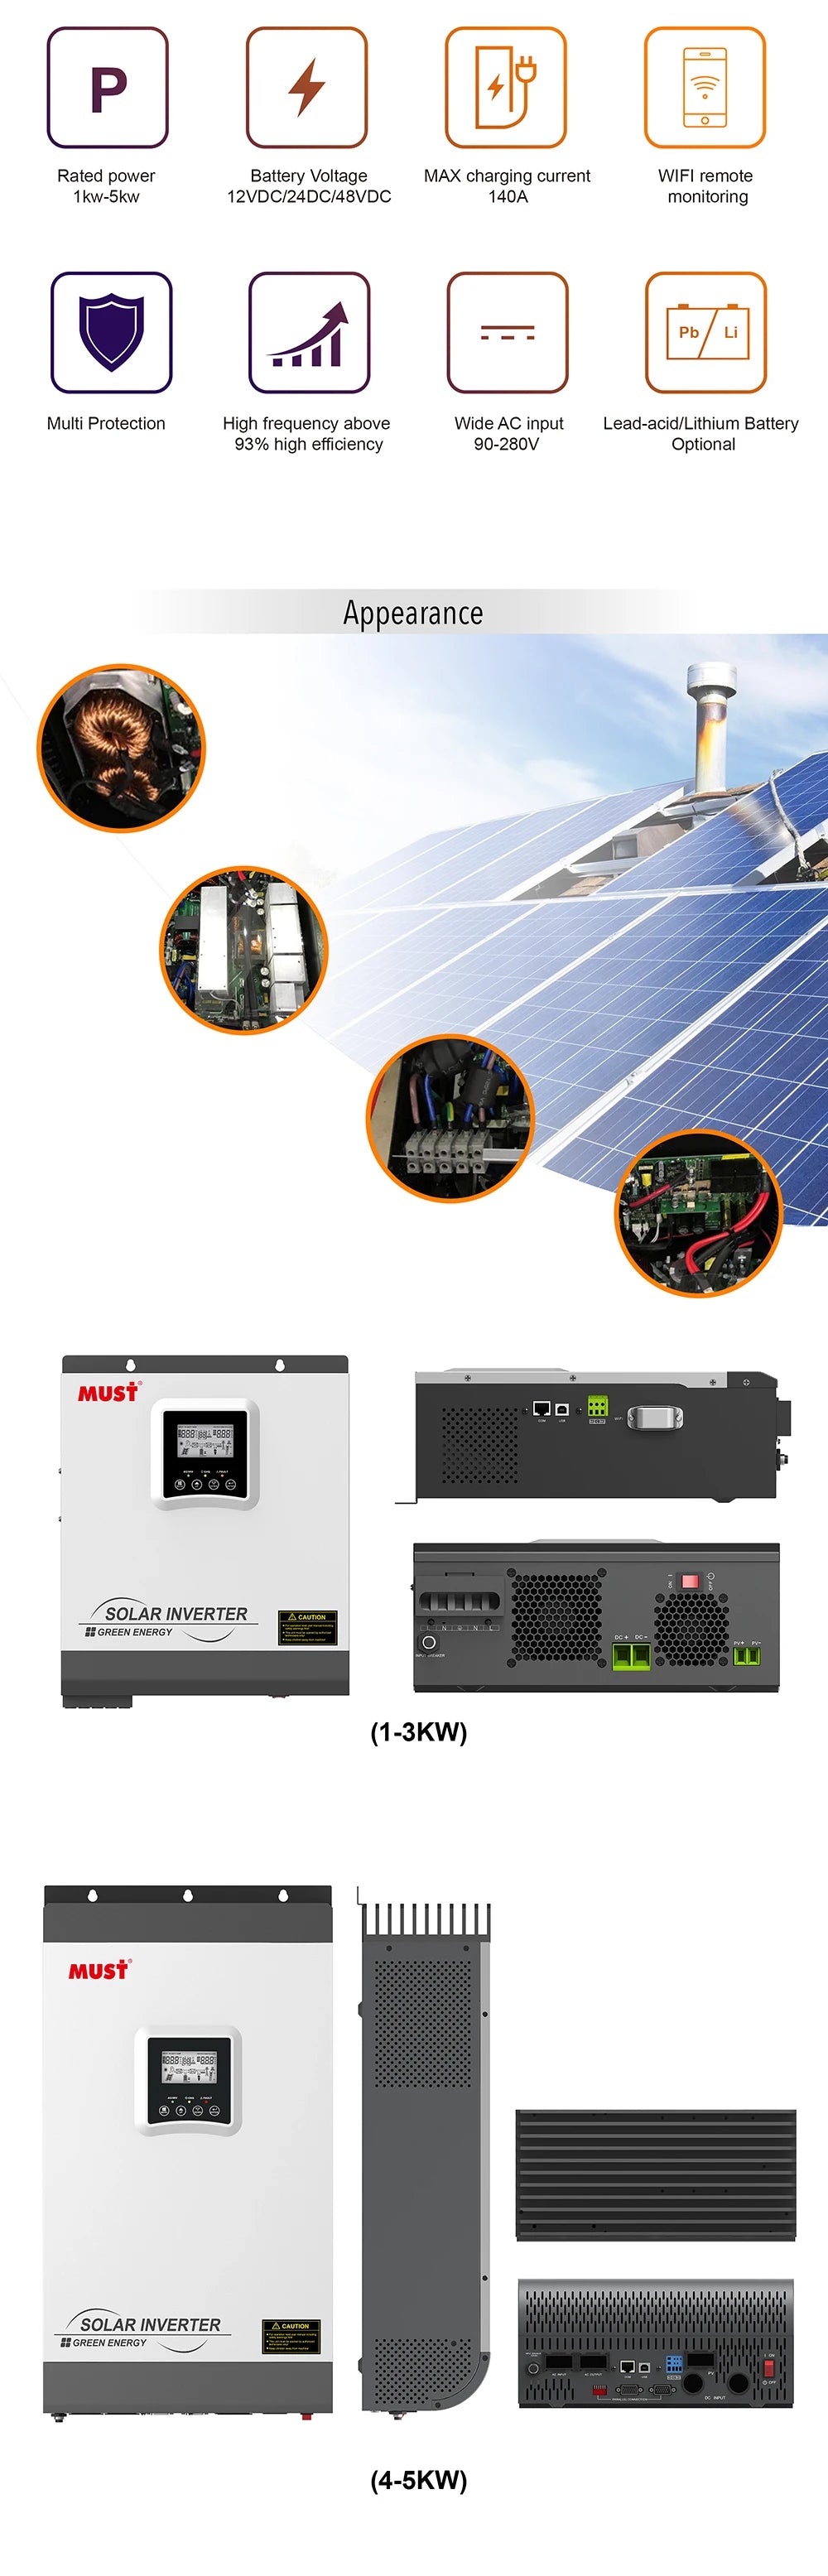 PV1800 inverter with Wi-Fi remote monitoring, suitable for home use with lead-acid or lithium batteries.